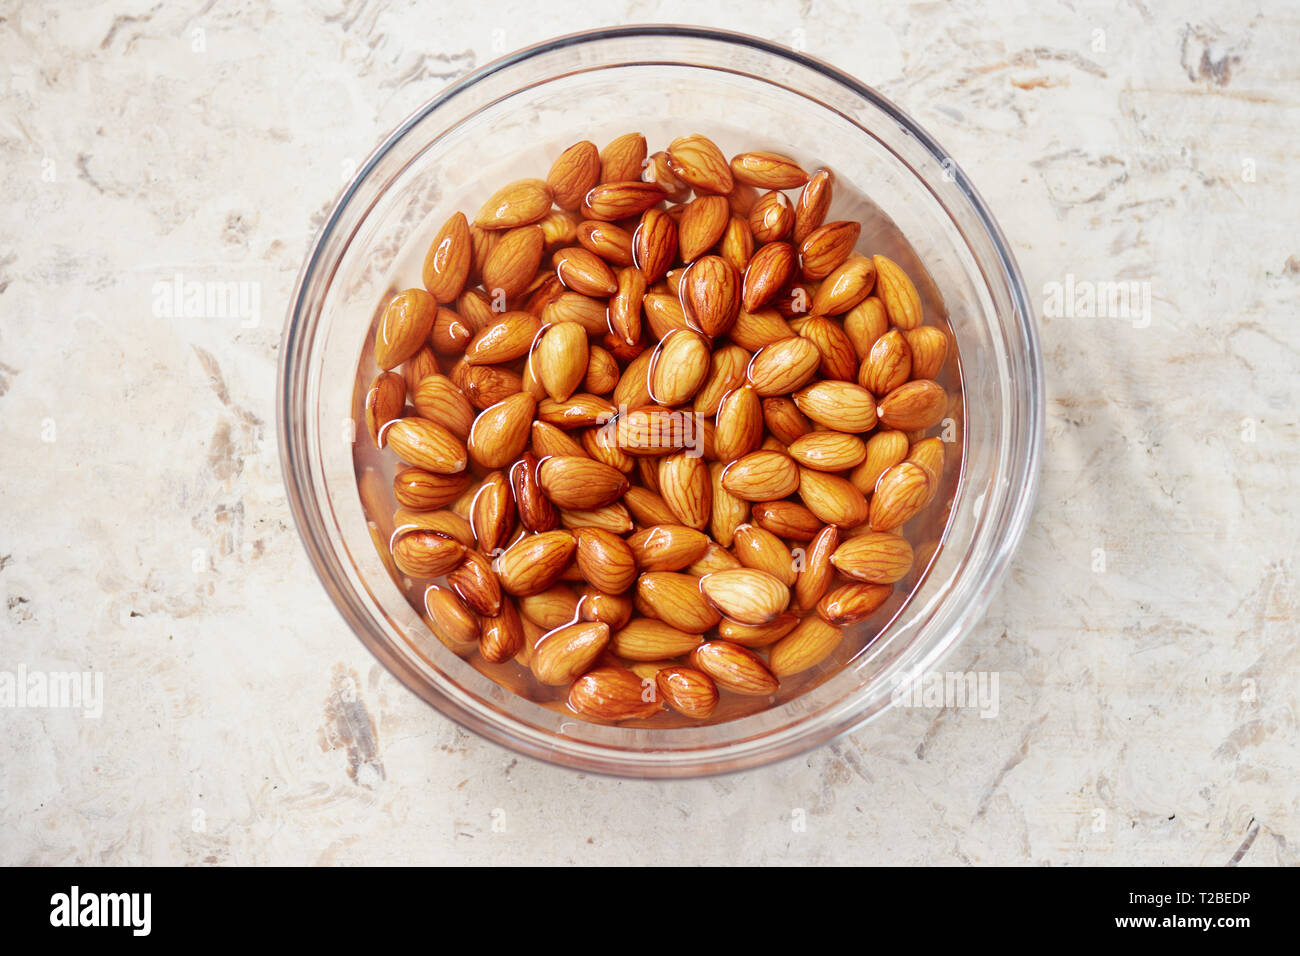 Soaking almonds in water. Almonds being softened in water to create almond milk. Stock Photo